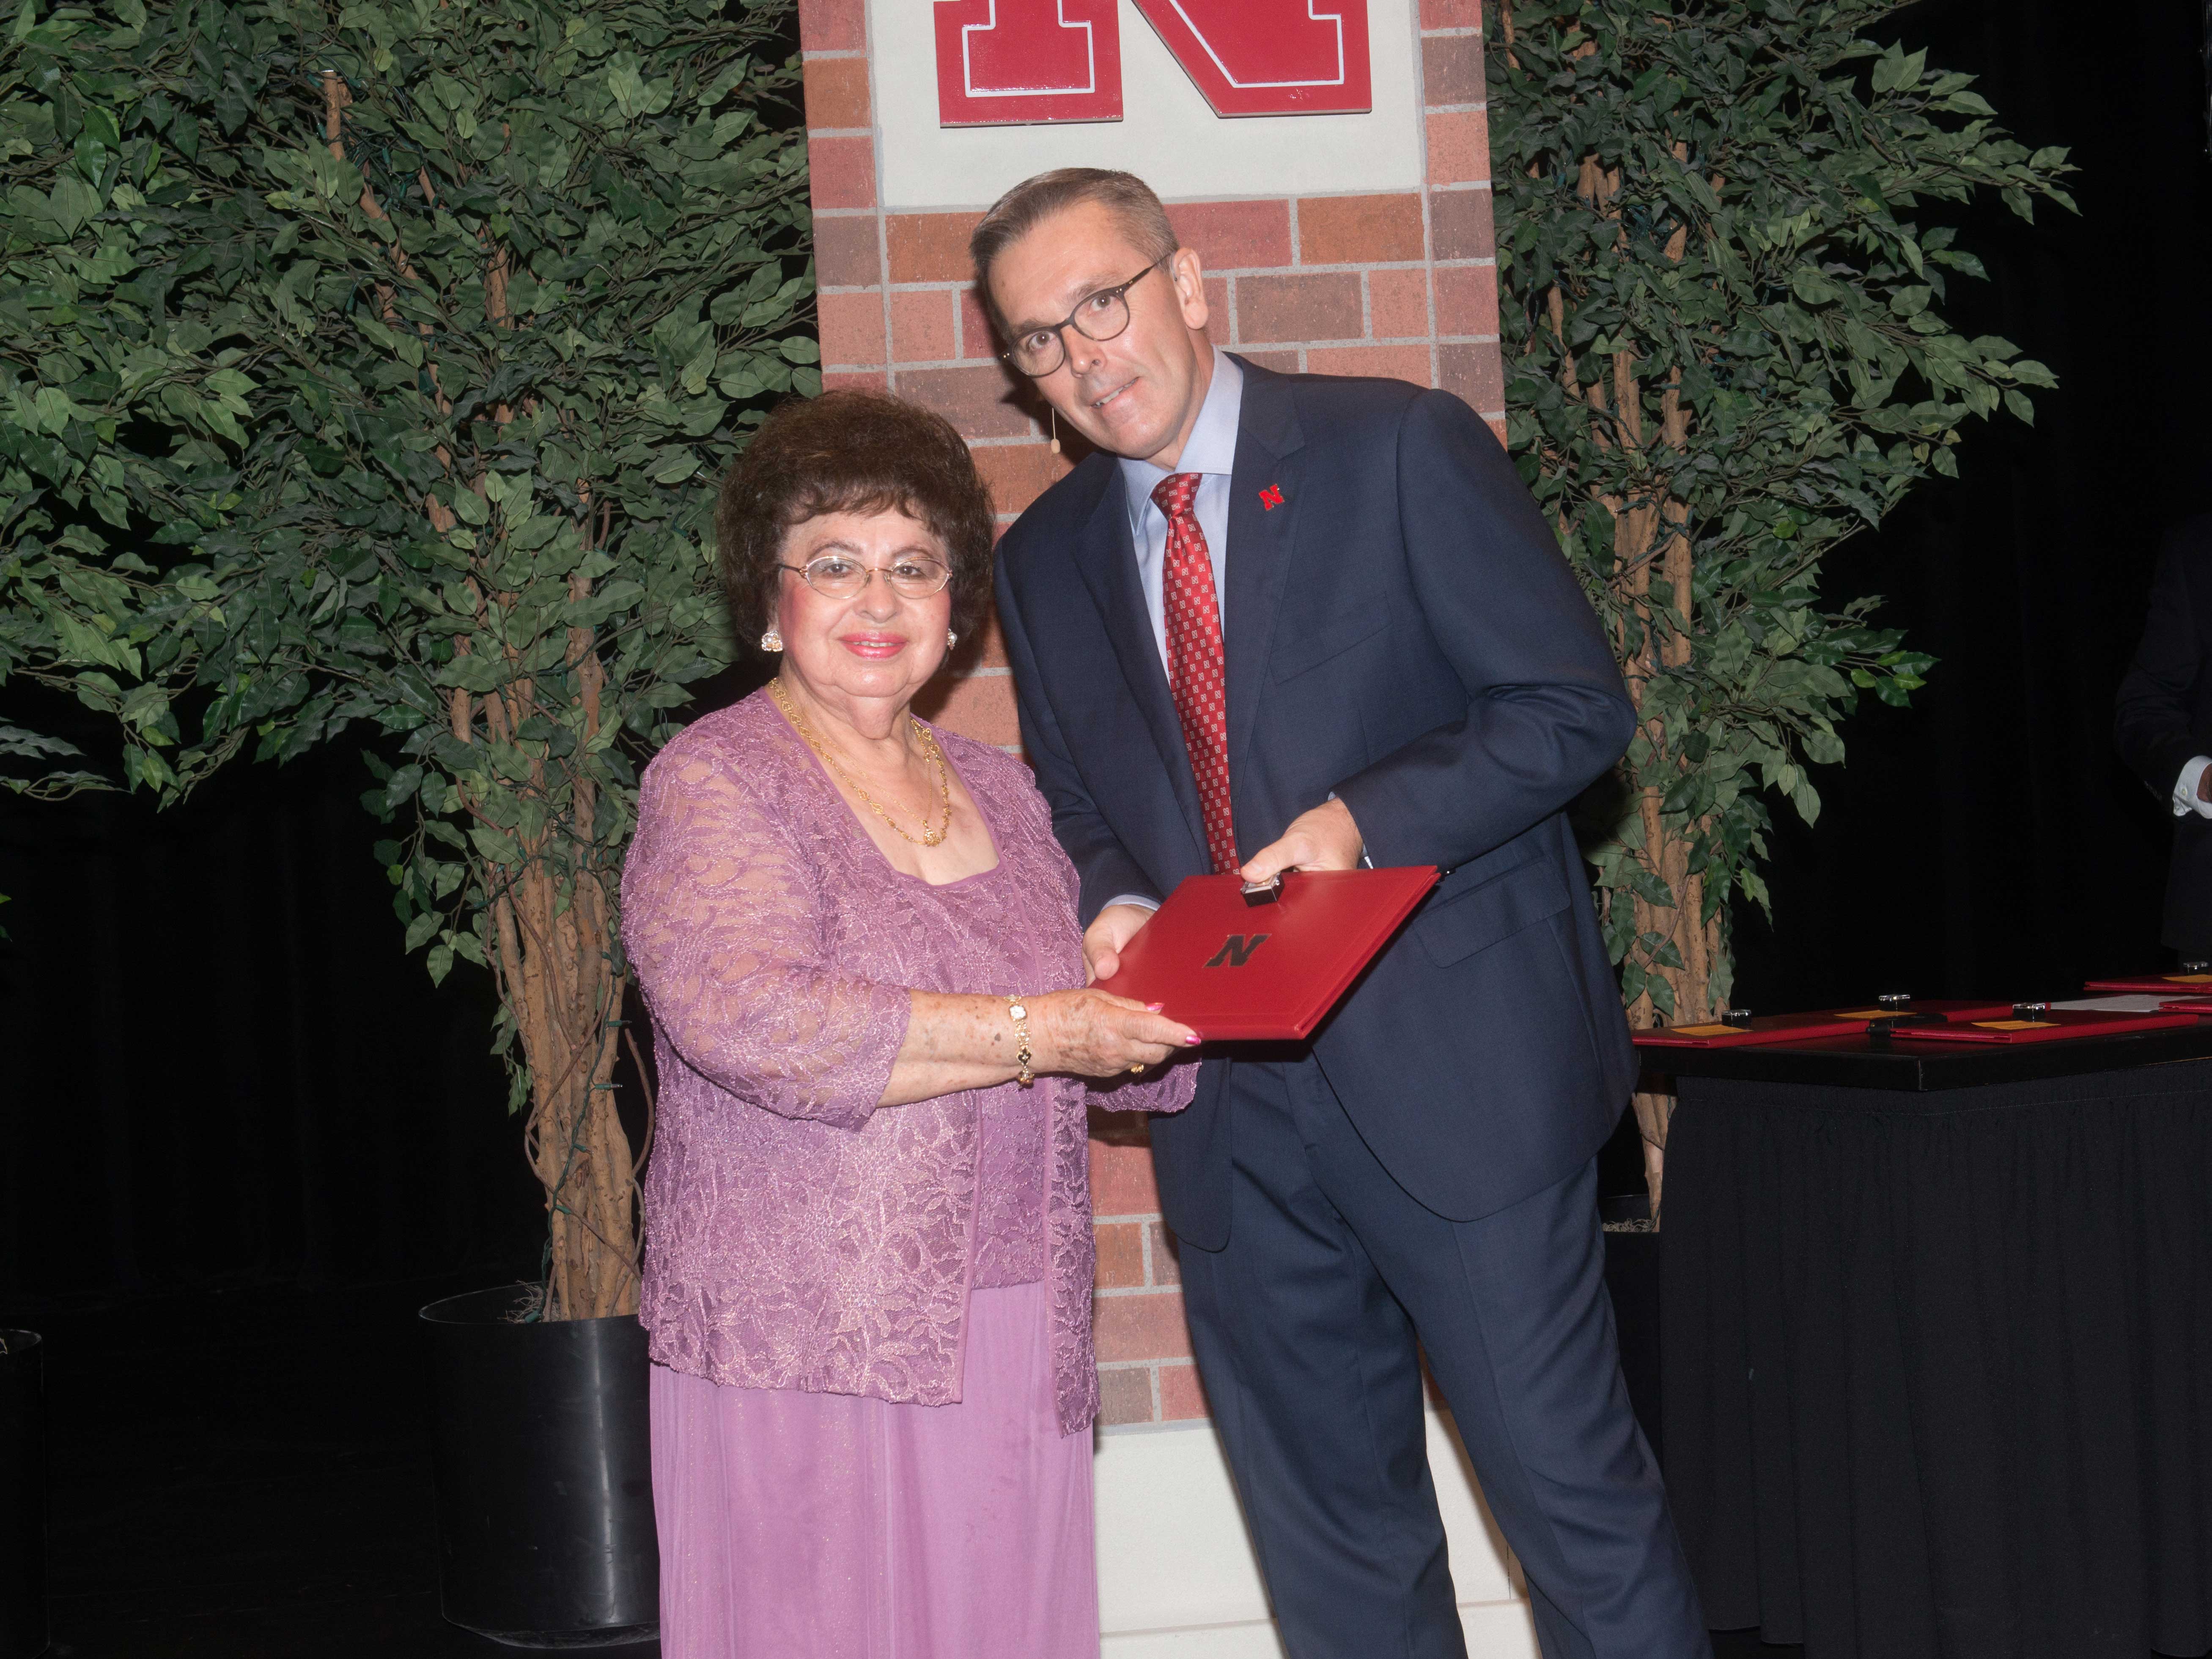 Prispa Espinosa from University Housing was honored by Chancellor Ronnie Green for her 45 years of service to the university.